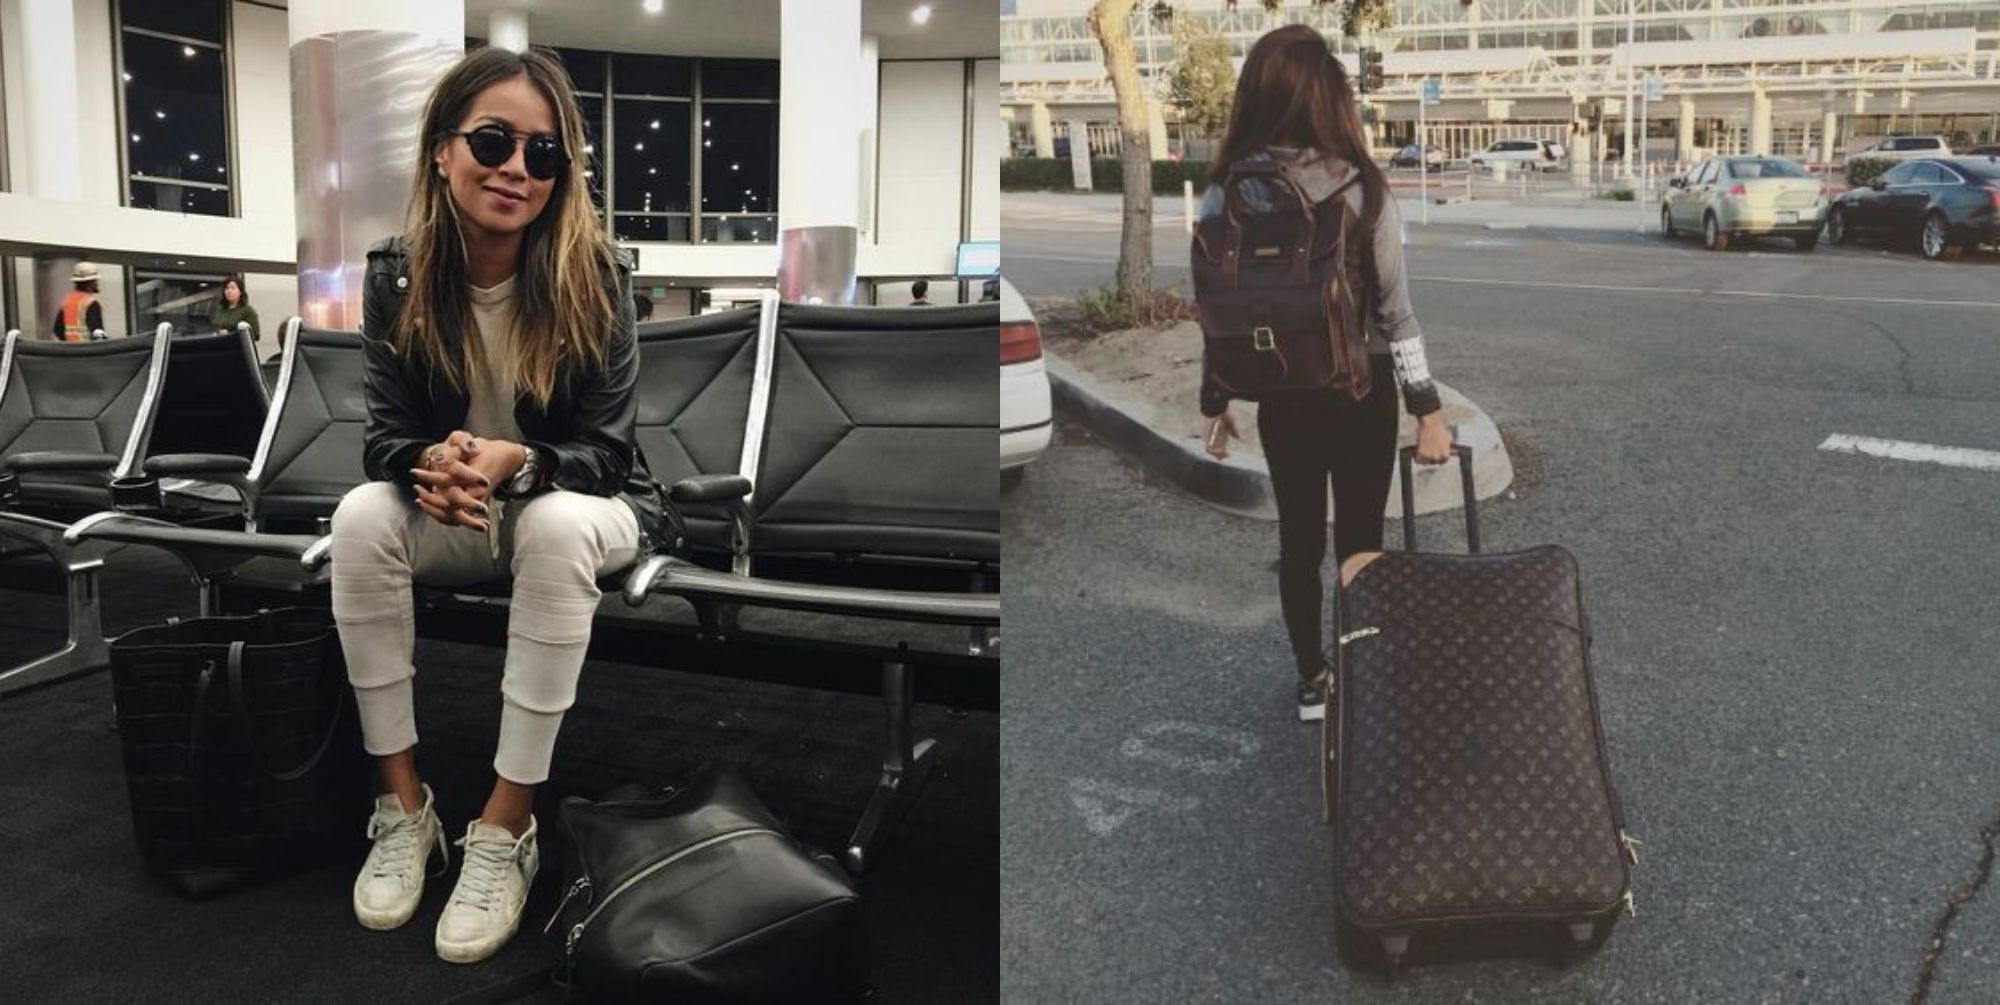 Girl Sitting At Airport And Girl Walking With Suitcase